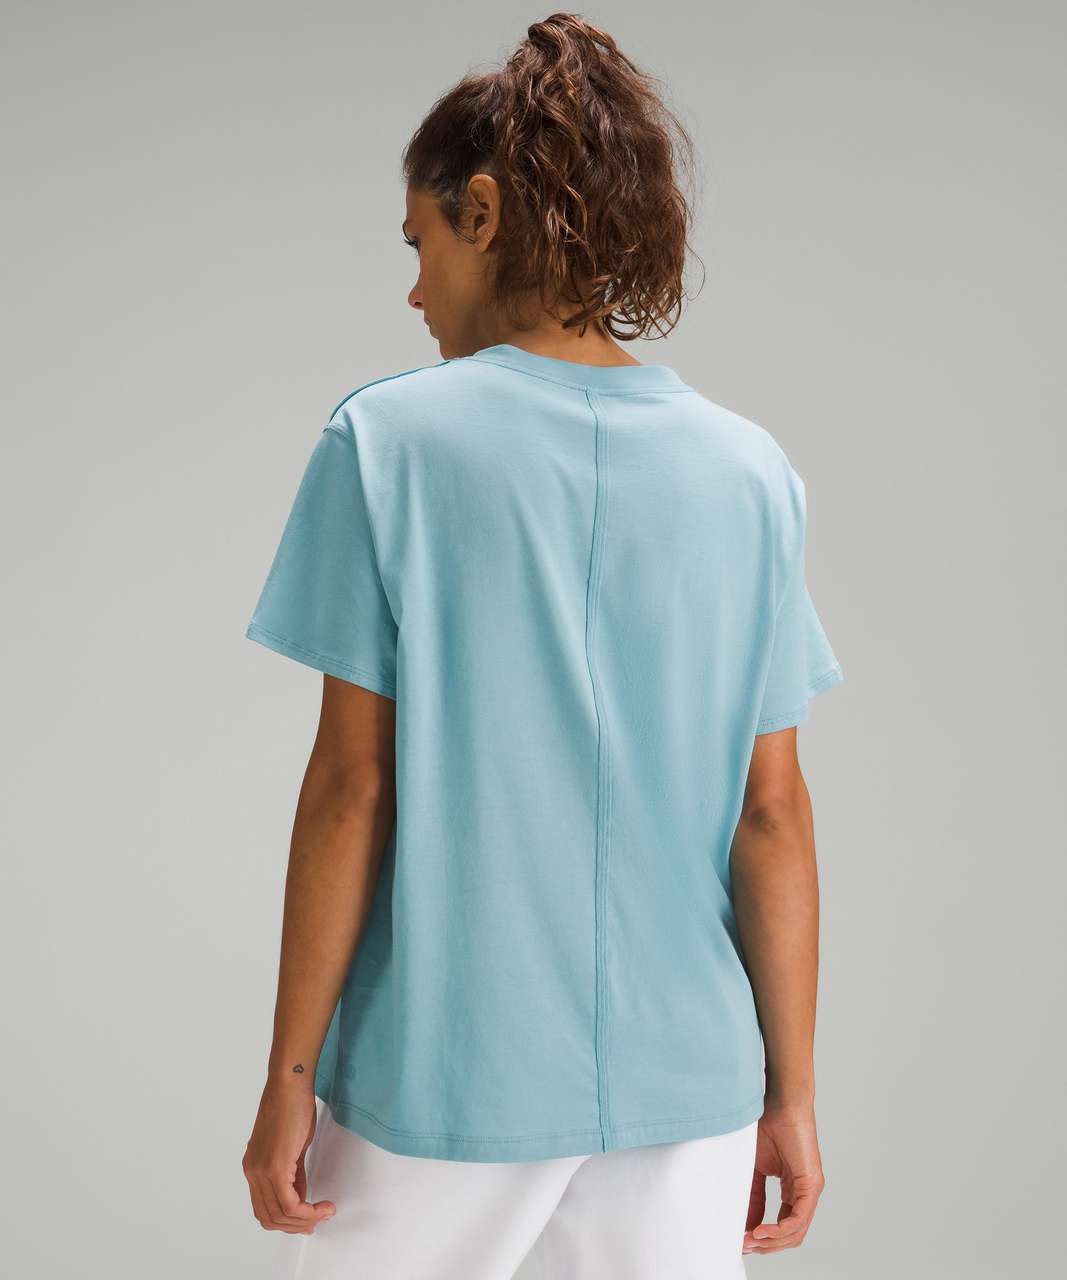 Lululemon All Yours Cotton T-Shirt - Tidal Teal